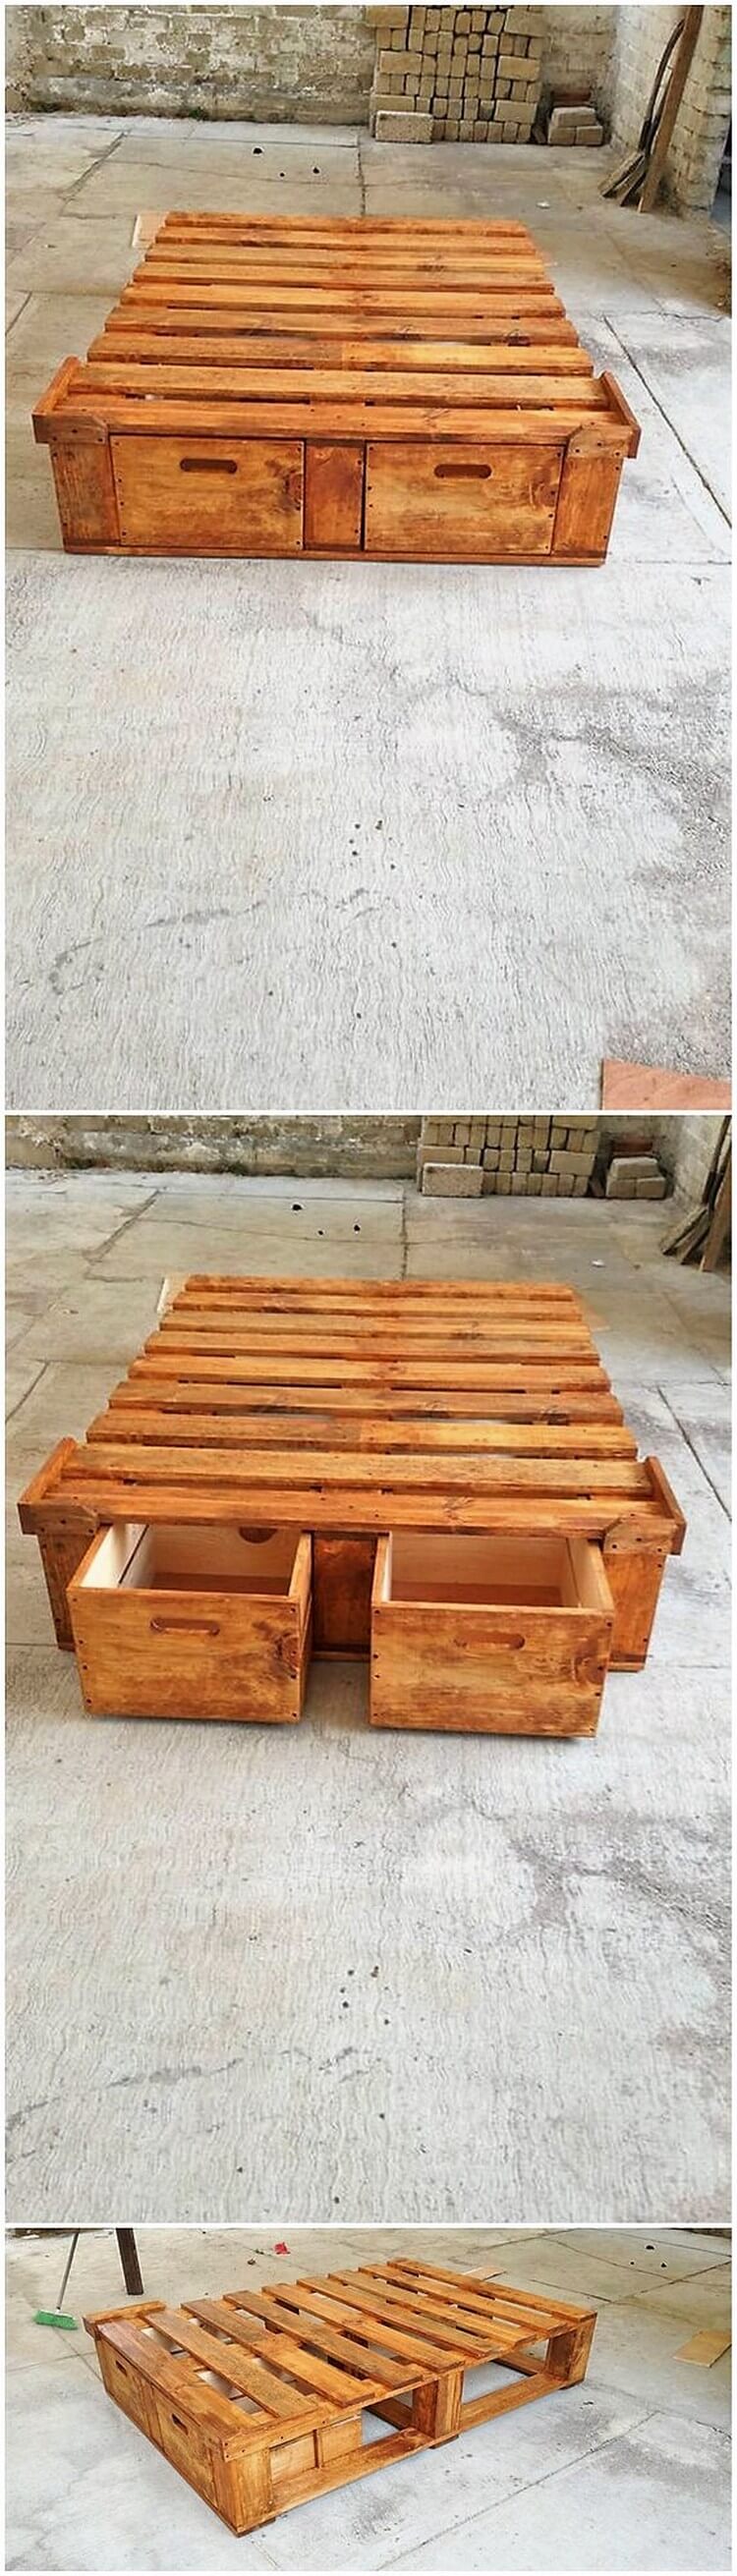 Pallet Table with Drawers